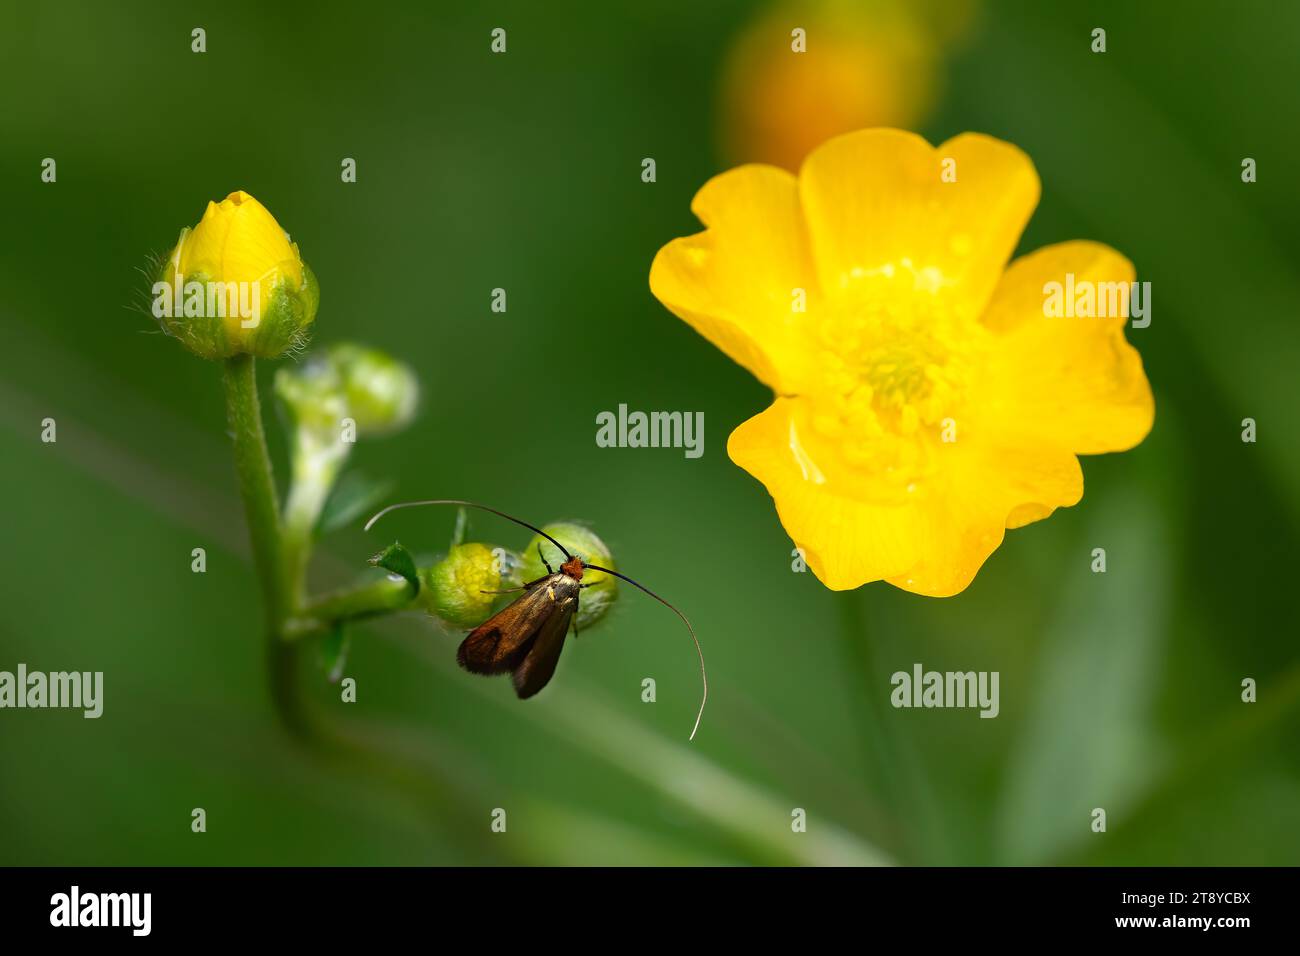 Adelidae butterfly perched on yellow field flowers, horizontal macro nature photograph. Copy Space. Stock Photo